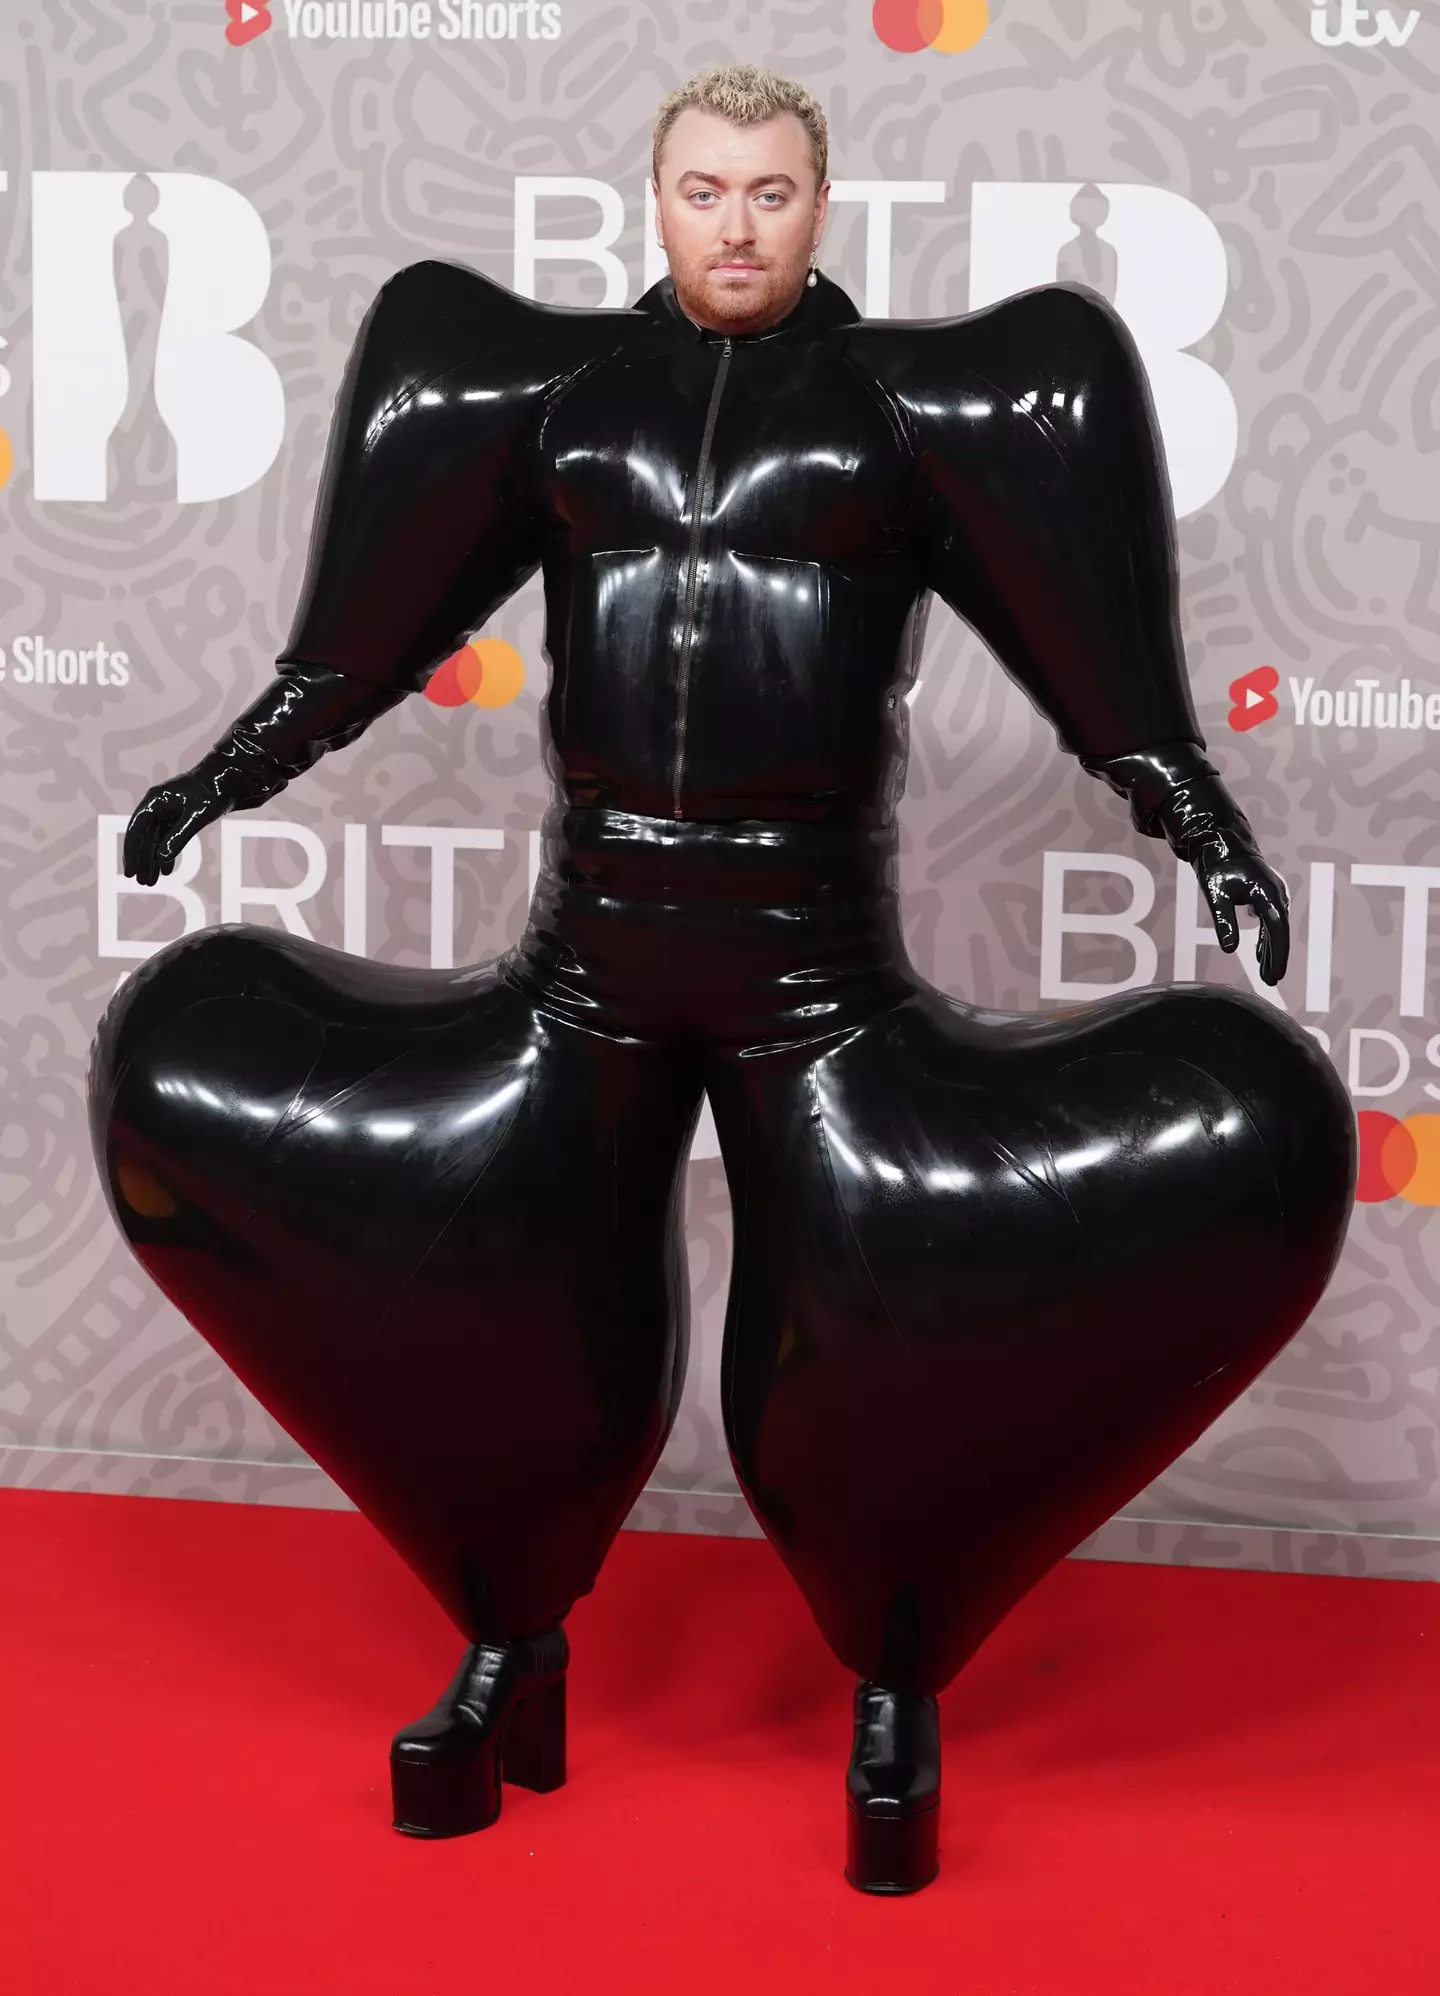 Harikrishnan's blow-up latex pants on sale with do not overinflate warning